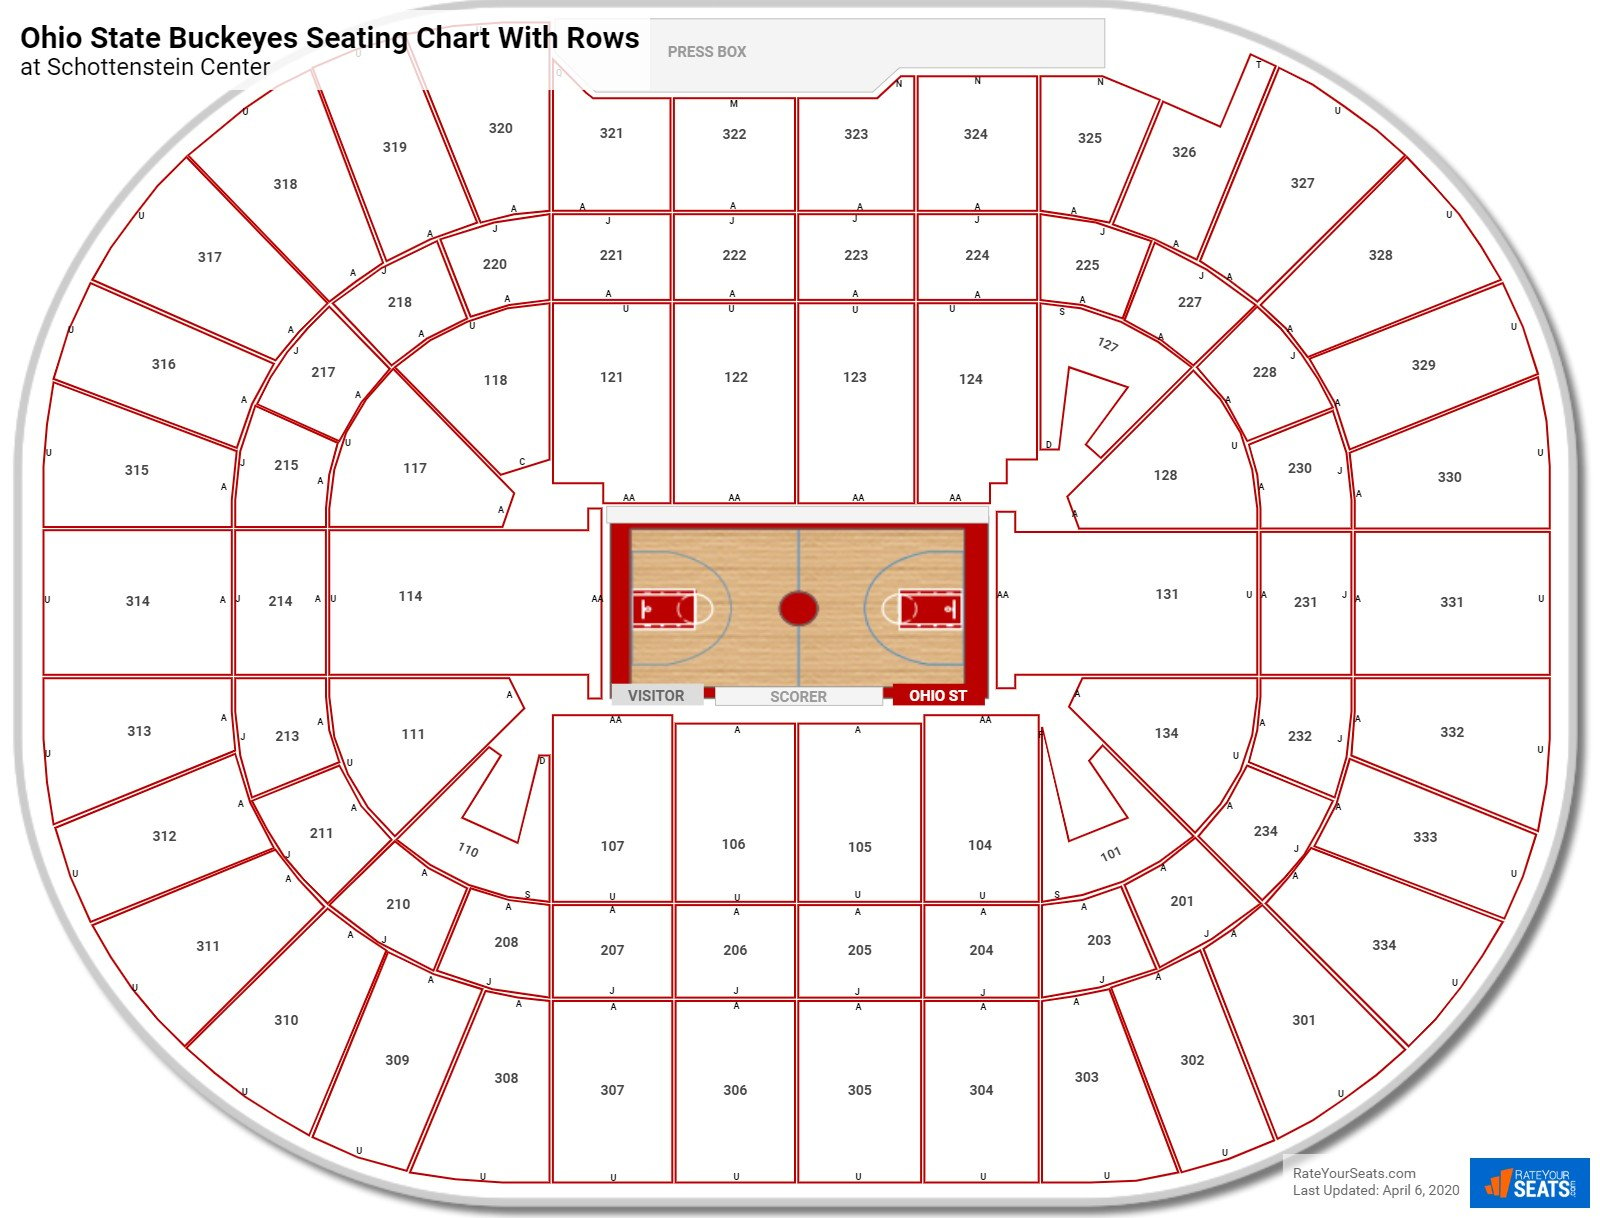 Schottenstein Center Seating Charts for Ohio State Basketball